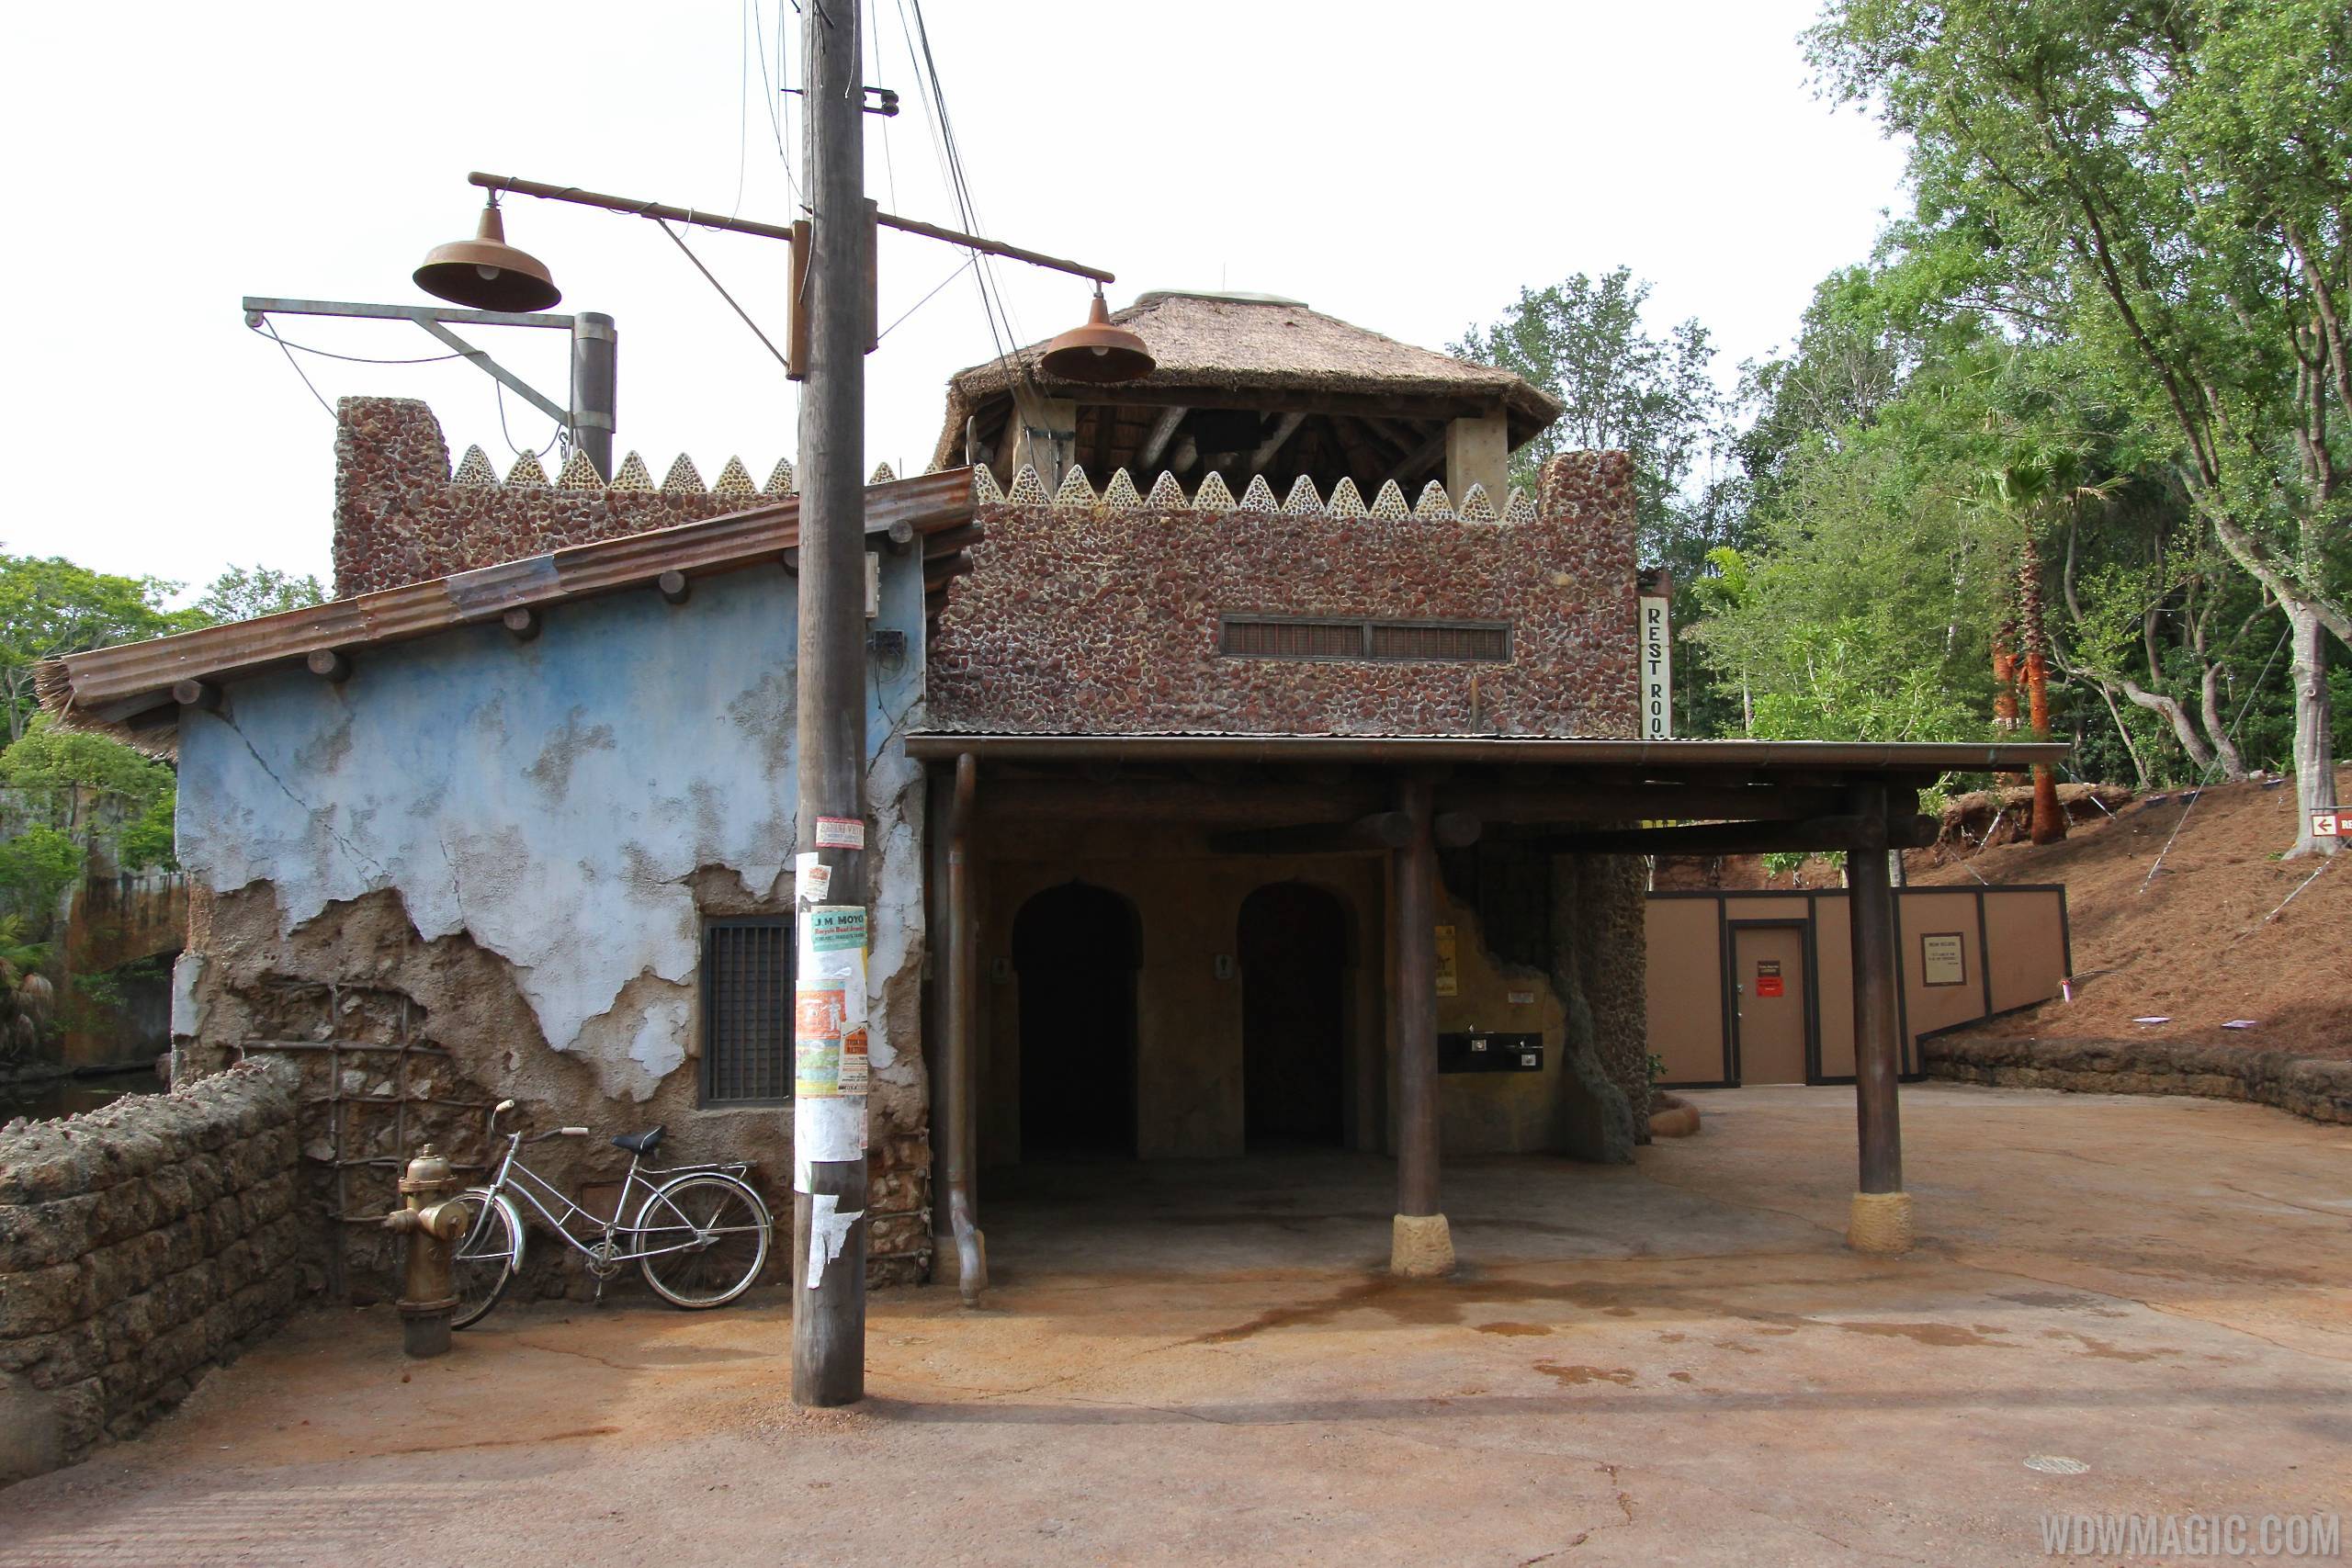 New Harambe Theatre area in Africa - The restrooms